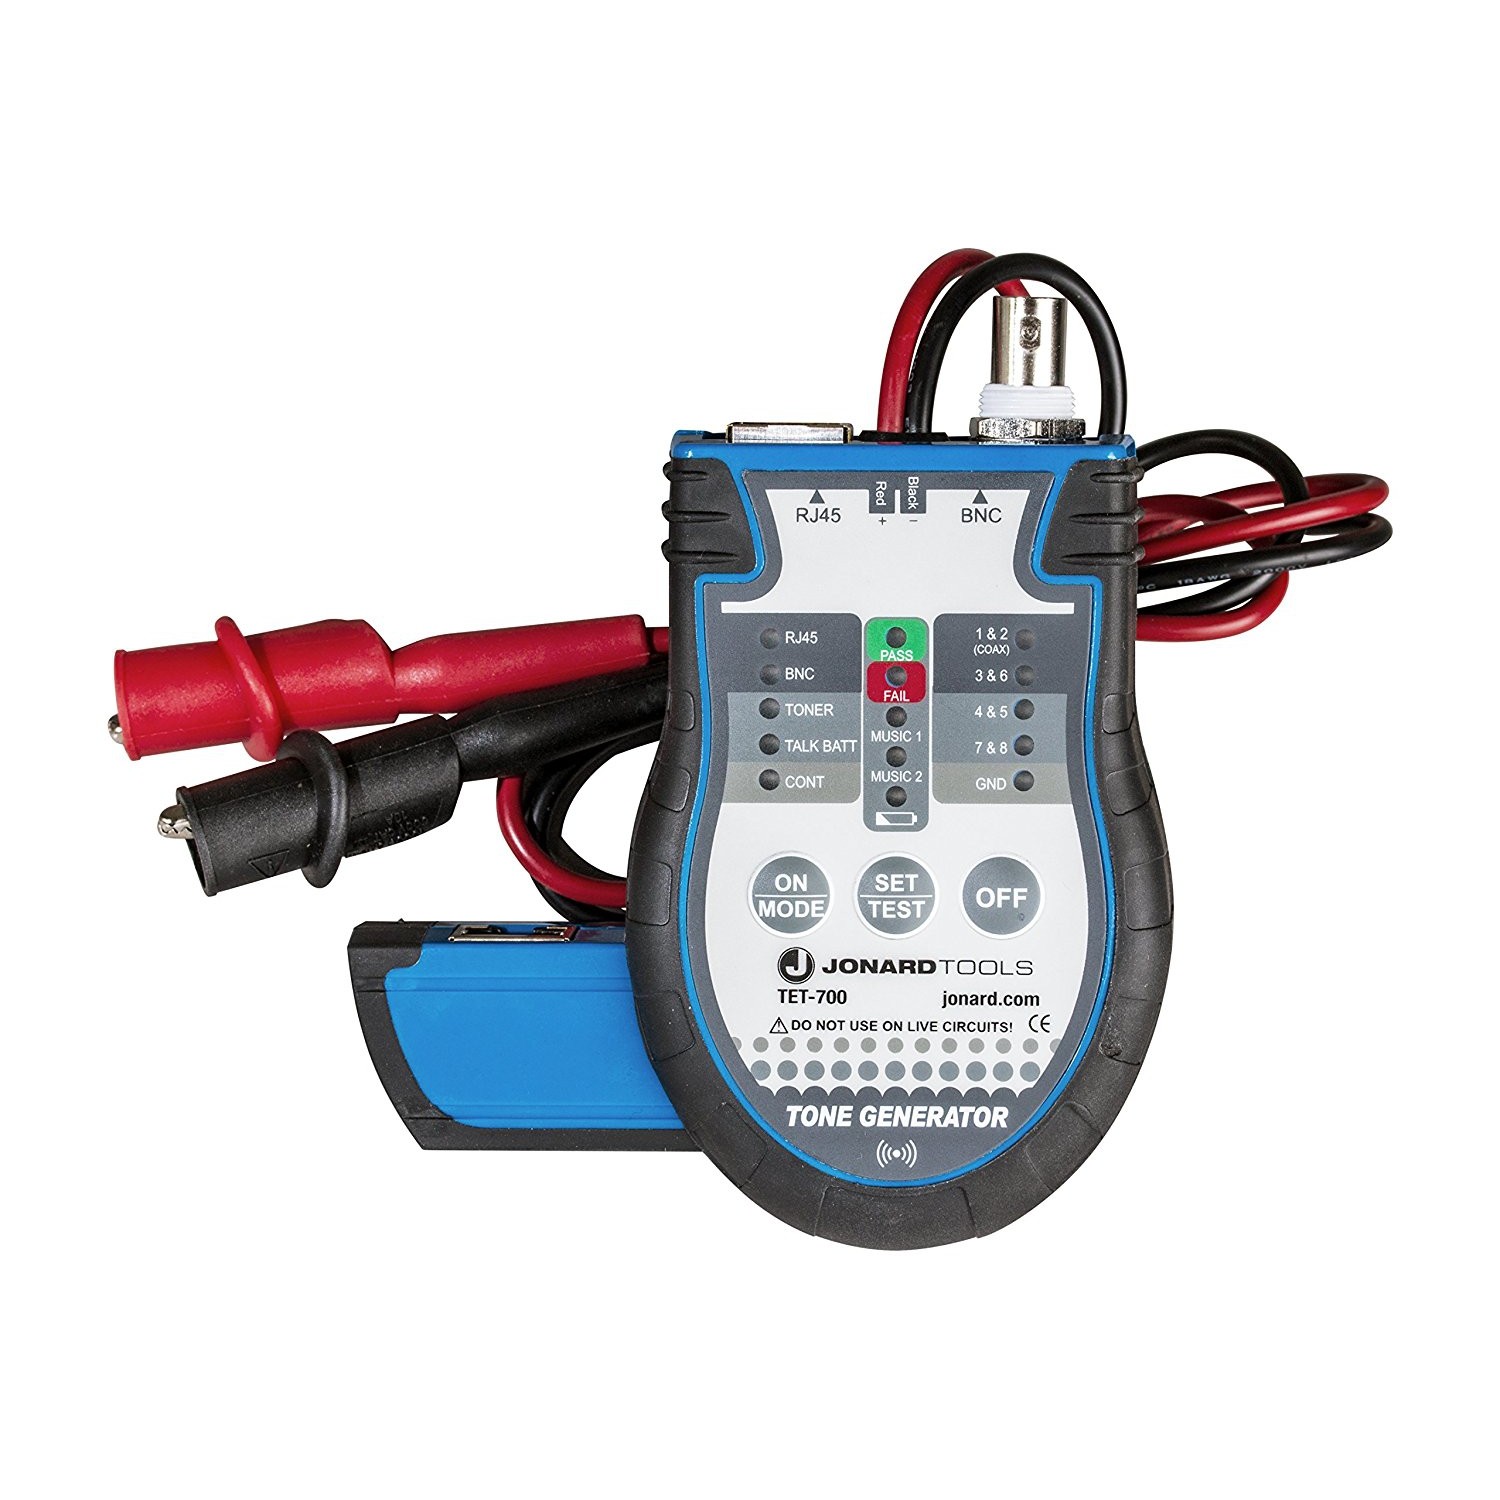 Jonard Industries Tools TET-700 Multi-Function Cable Tester and Toner